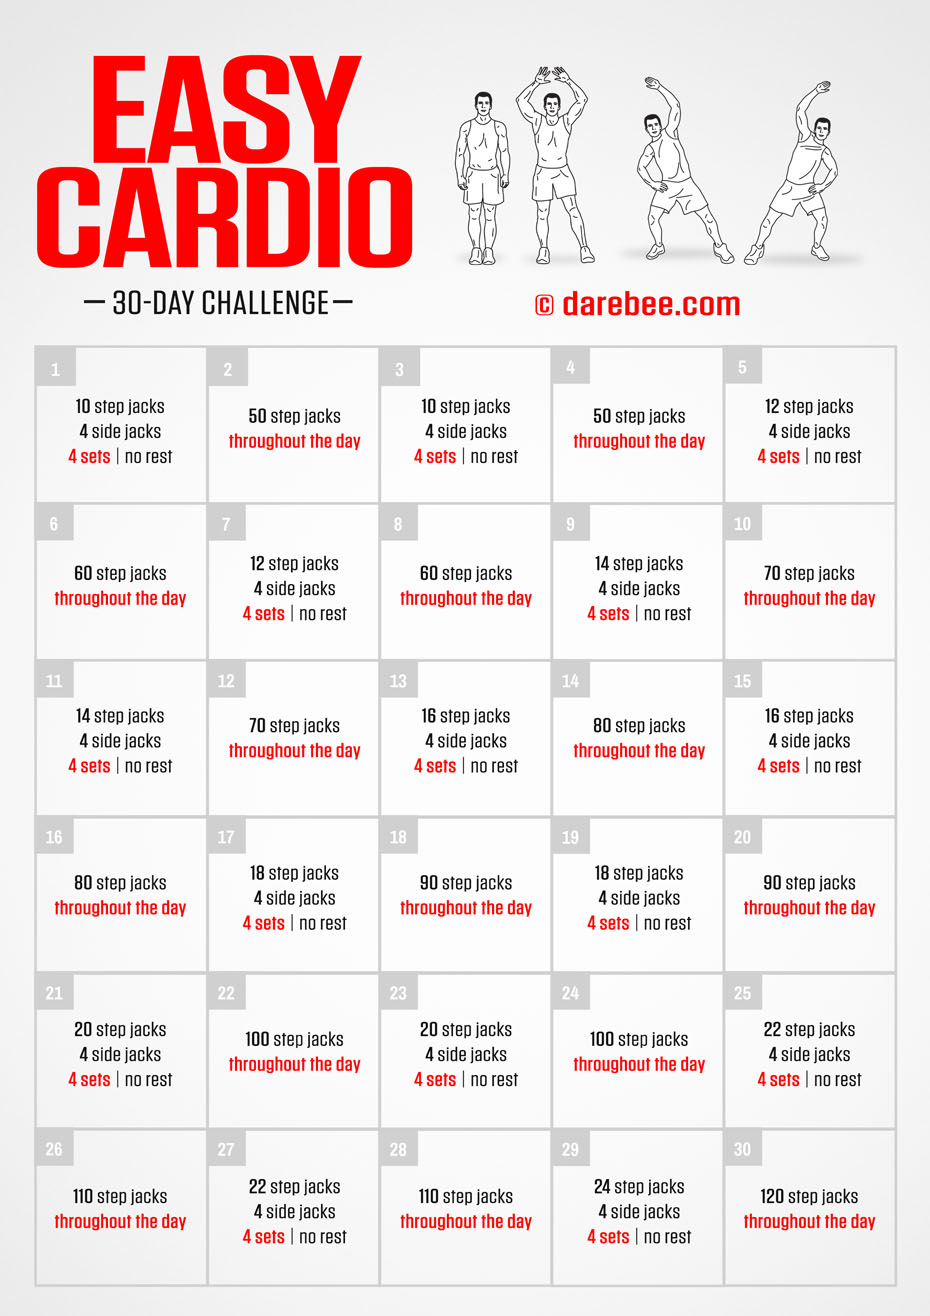 DAY 1 - 30 minute CARDIO WORKOUT for Active Seniors & Beginners